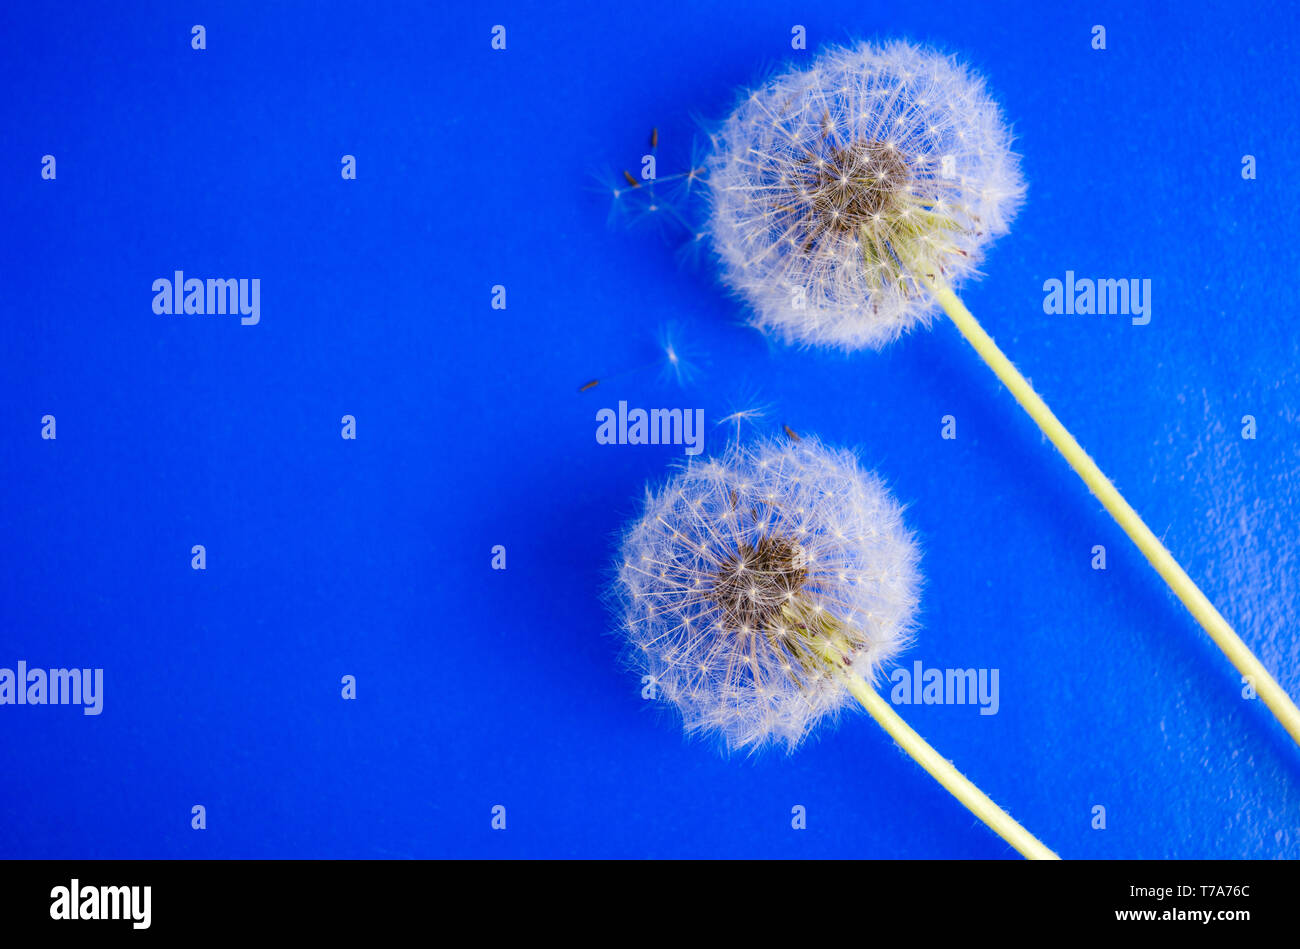 Dandelion flowers and seeds on blue background Stock Photo